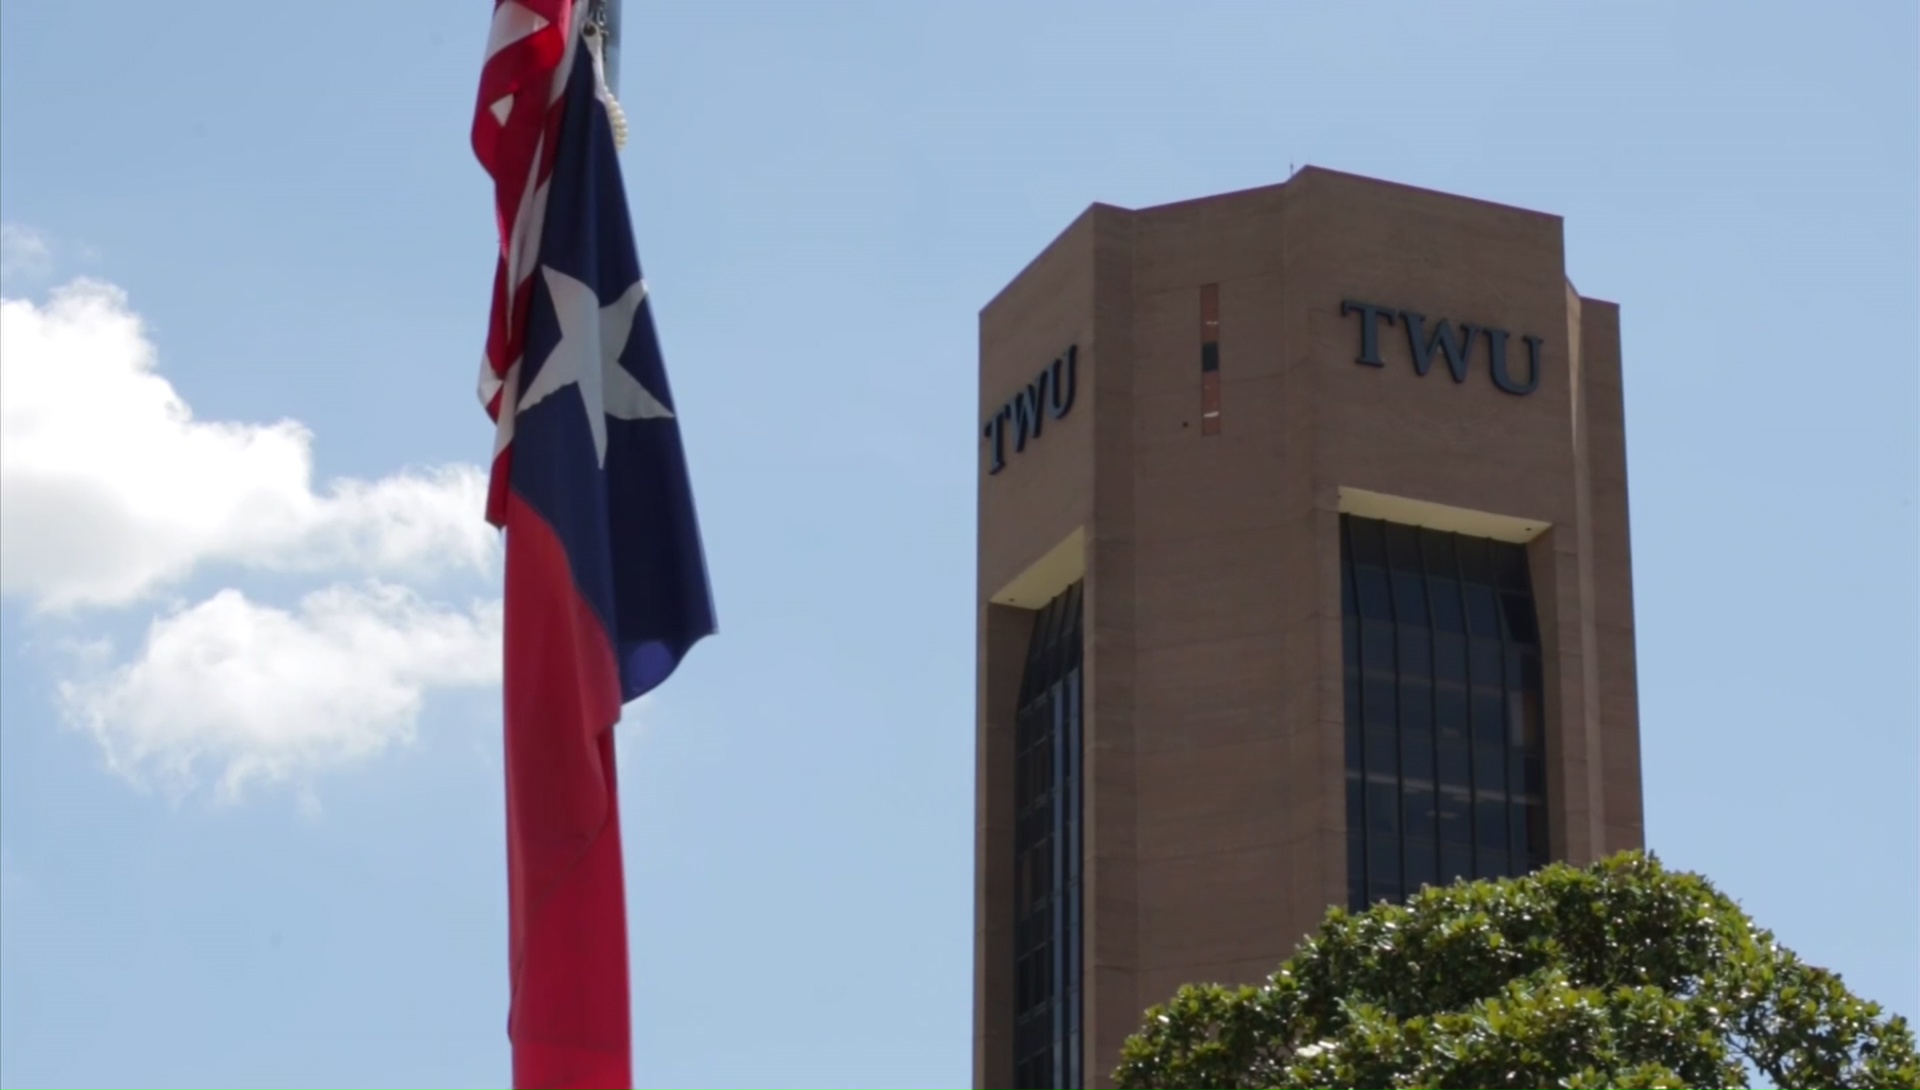 TWU Receives Largest Gift in School's History